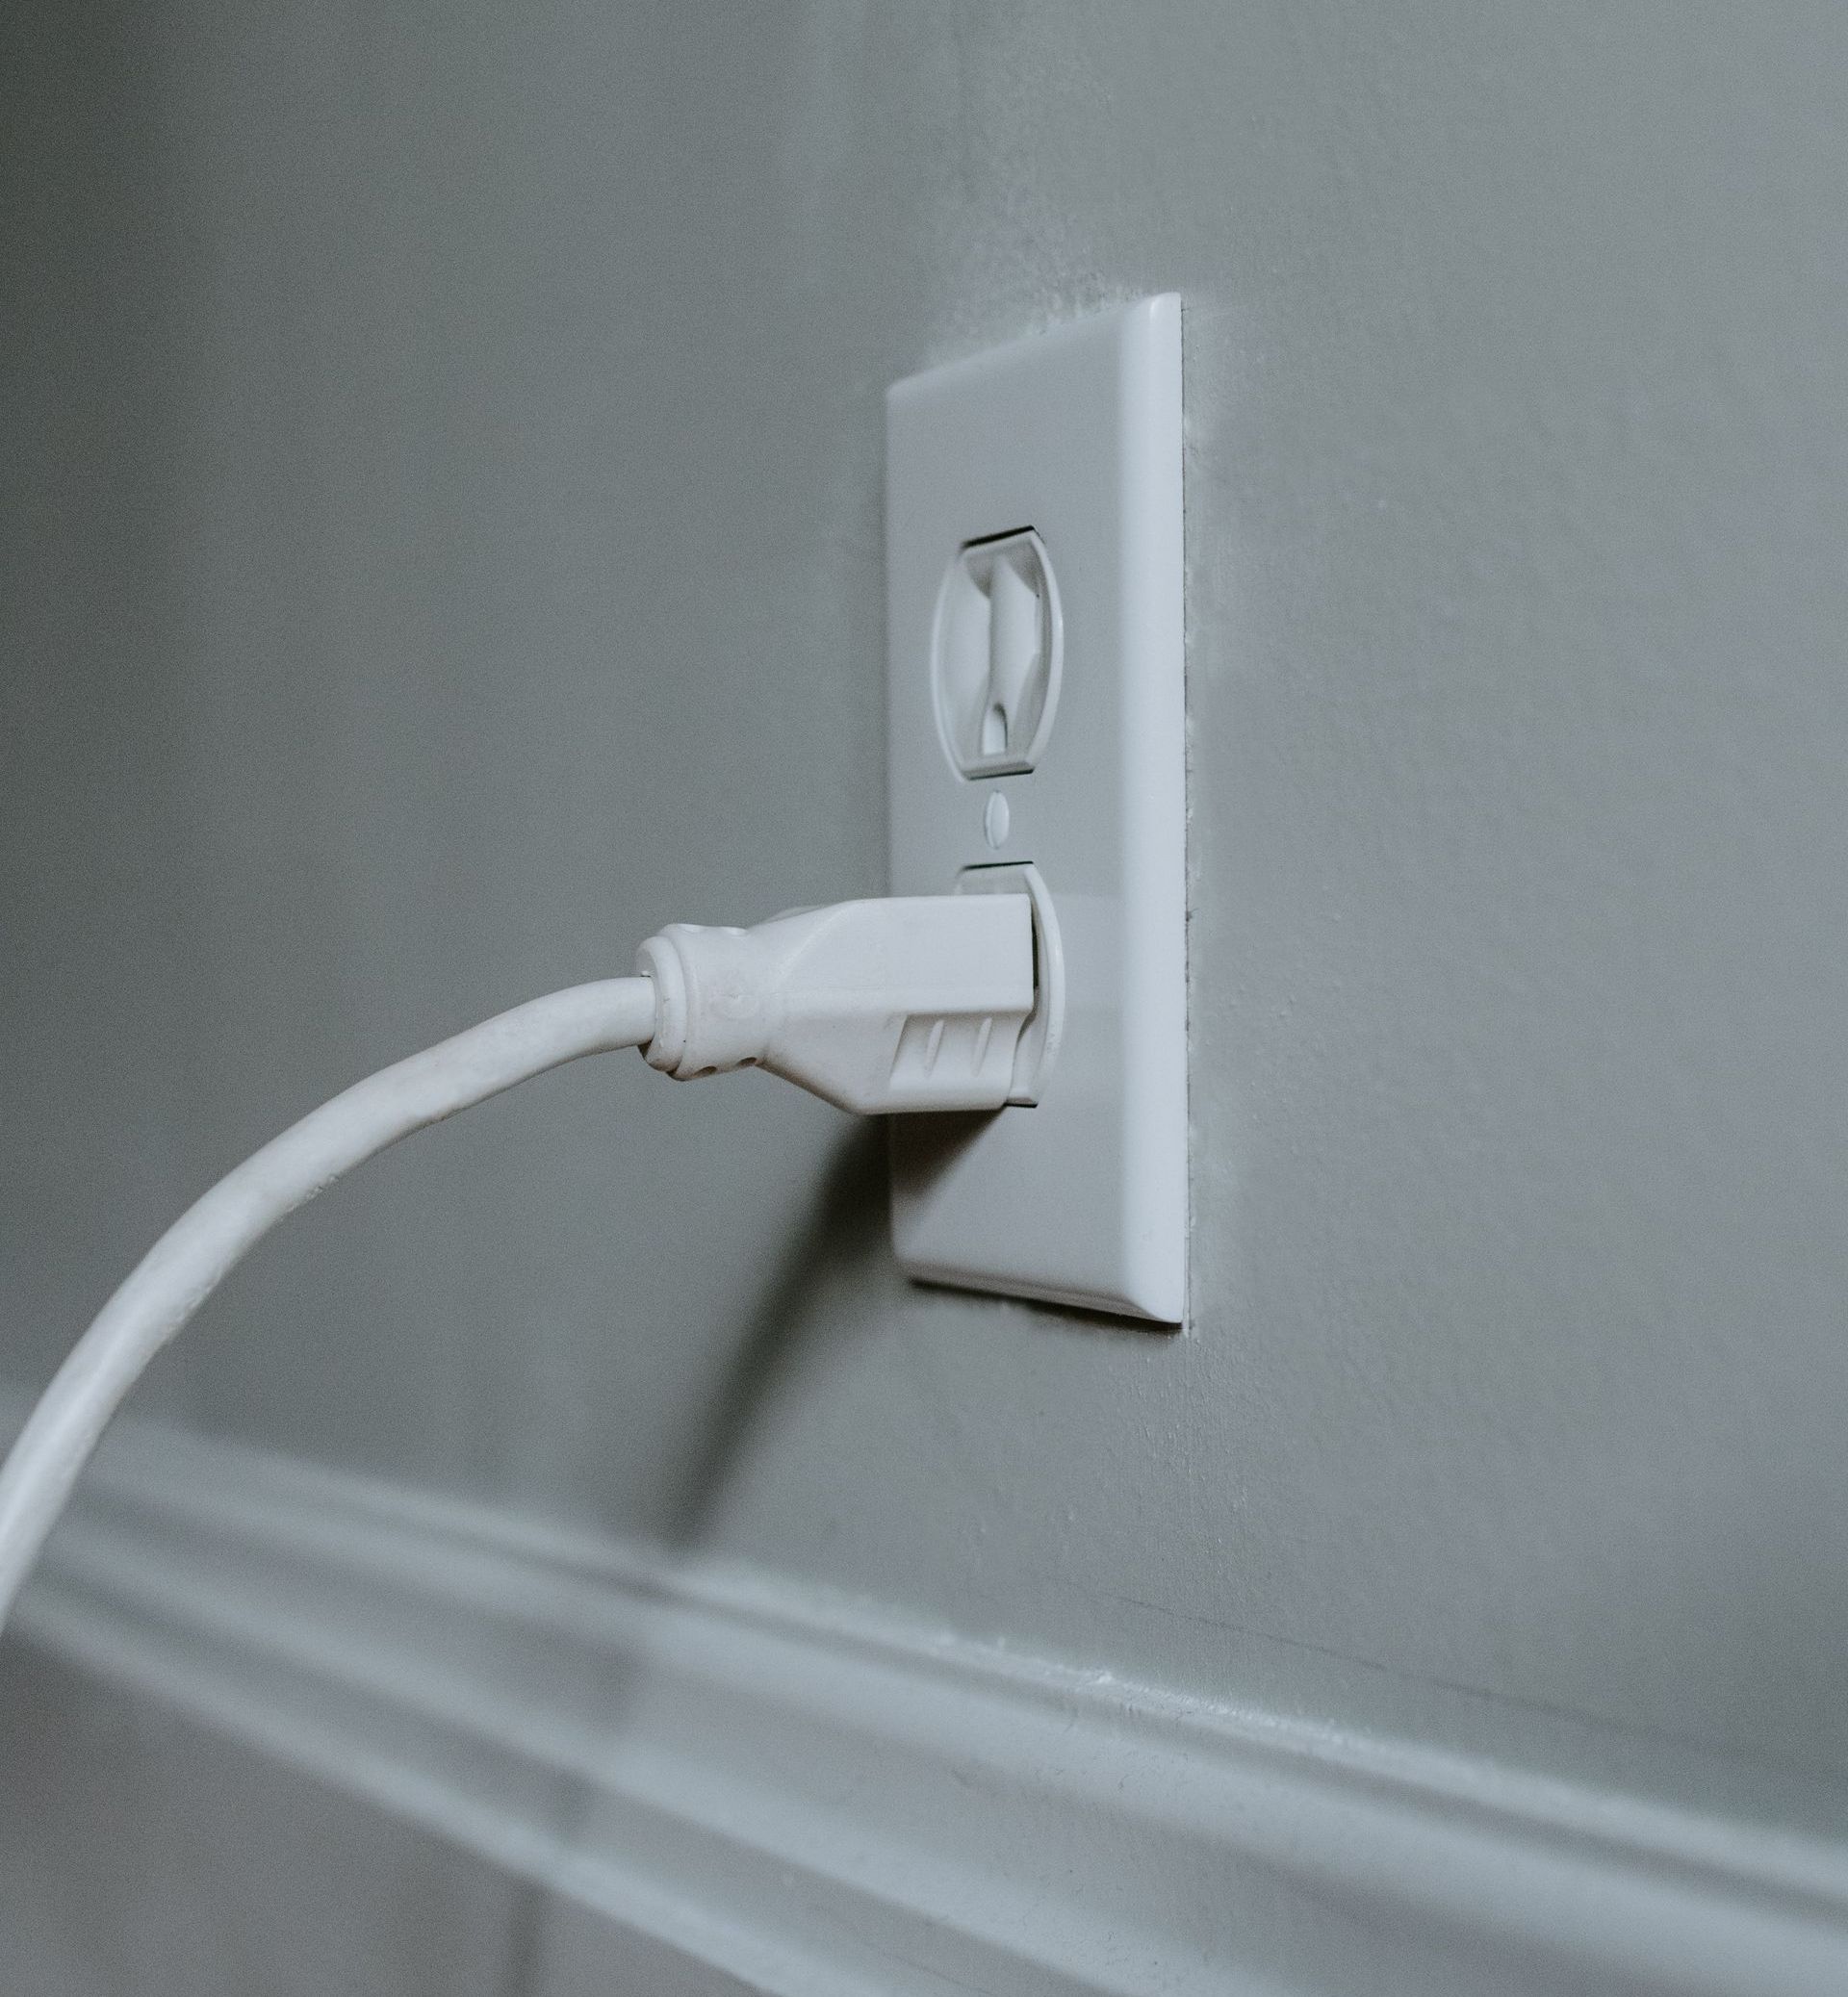 Electrical outlet seamlessly installed in a wall with a plugged cable providing power